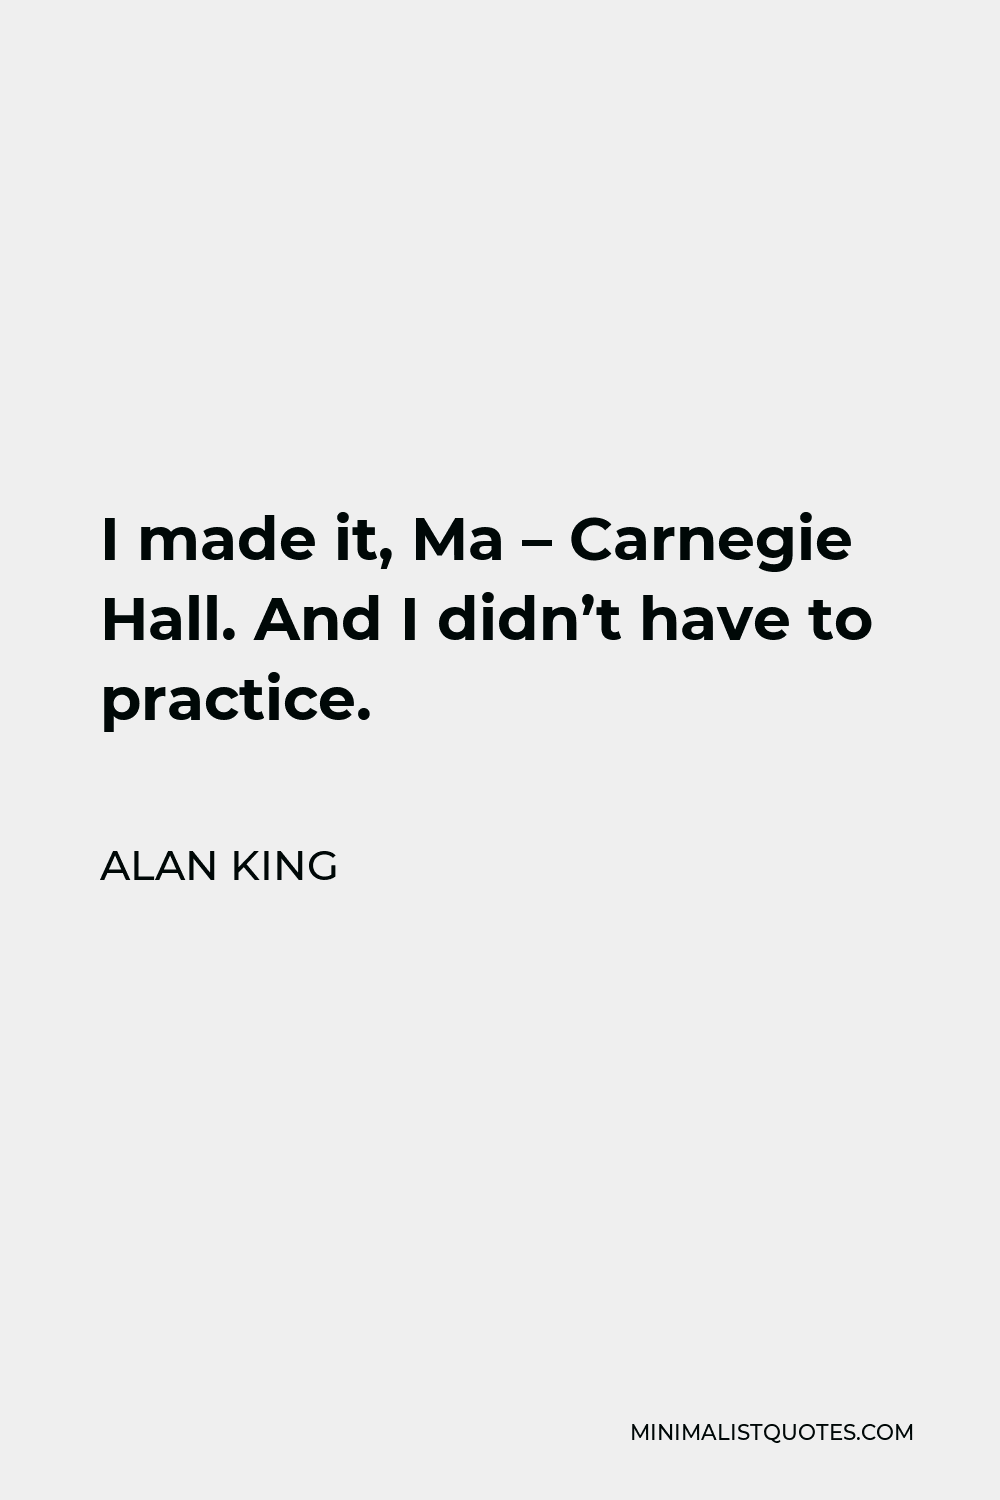 Alan King Quote - I made it, Ma – Carnegie Hall. And I didn’t have to practice.